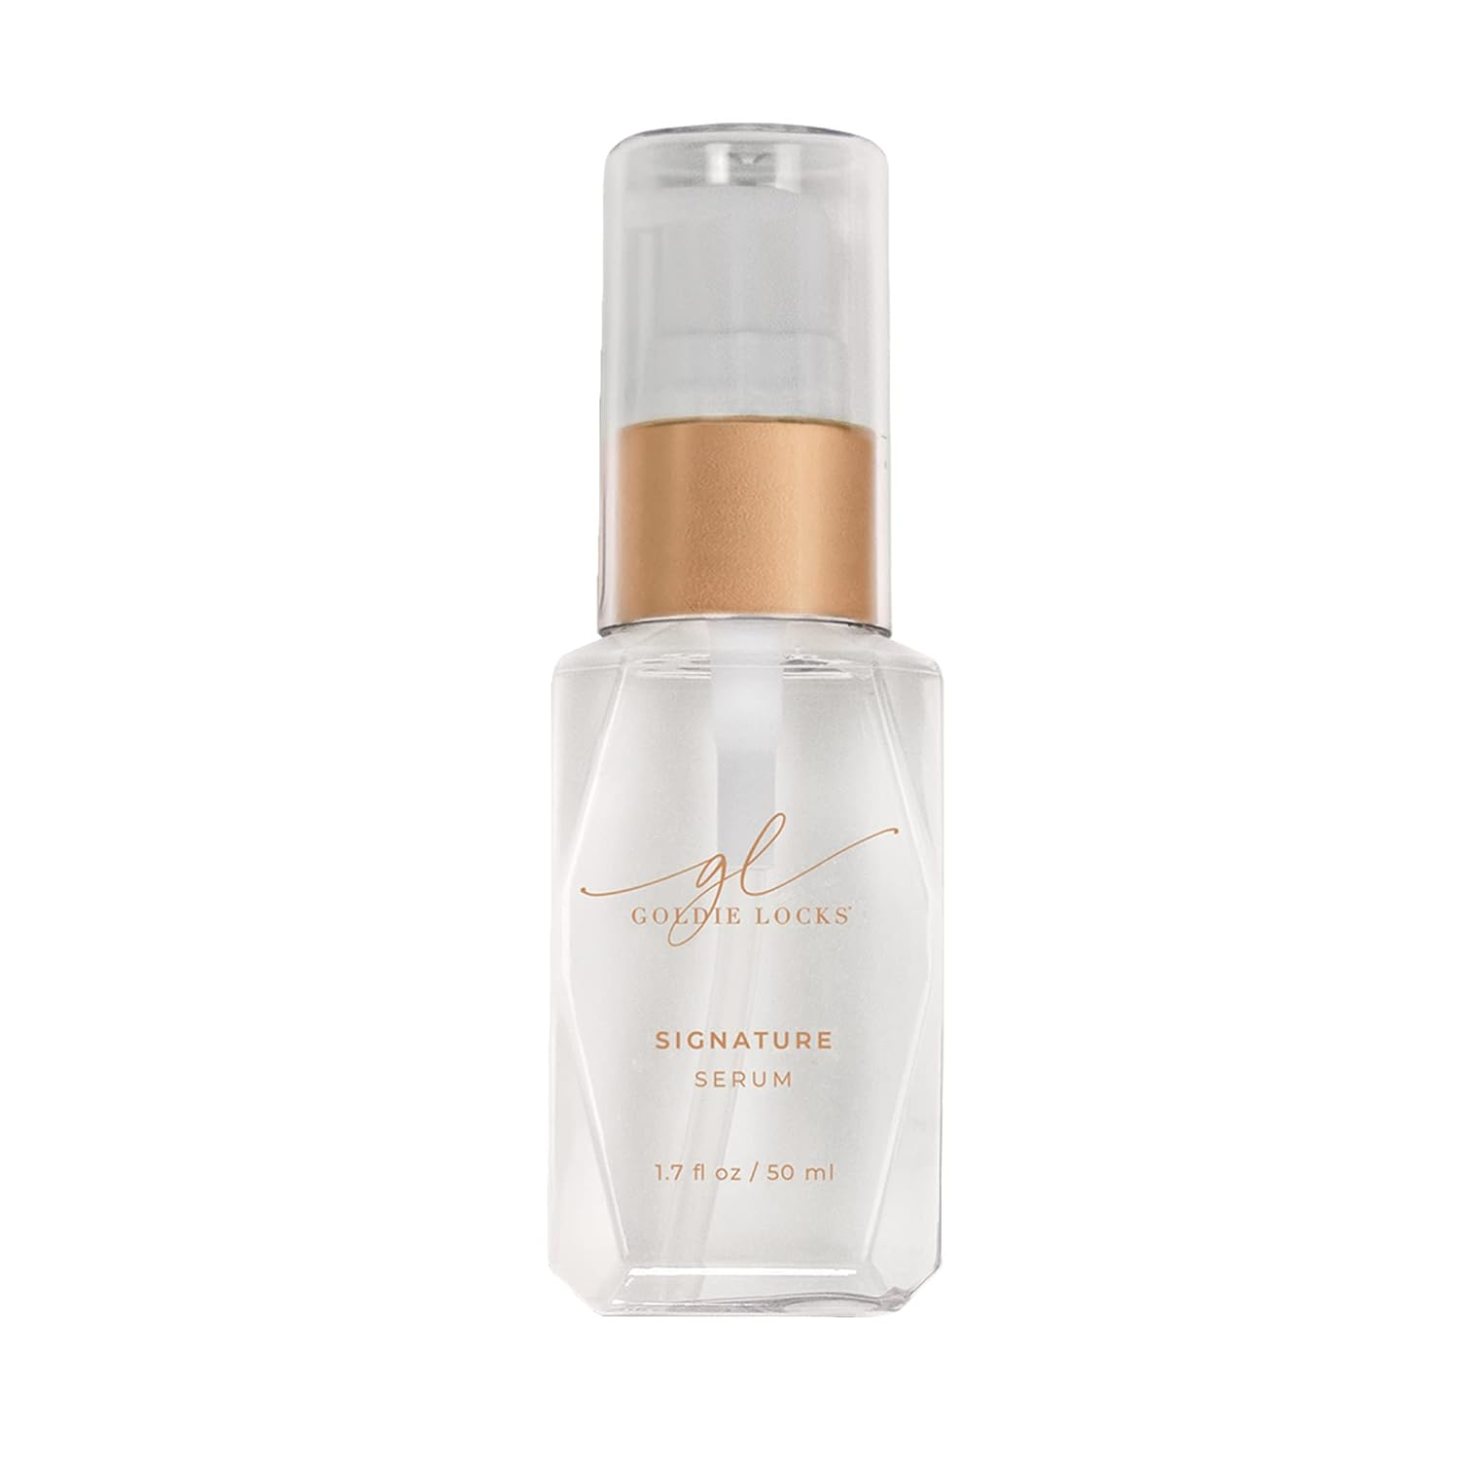 goldie locks signature serum, one of the best serums for dry hair